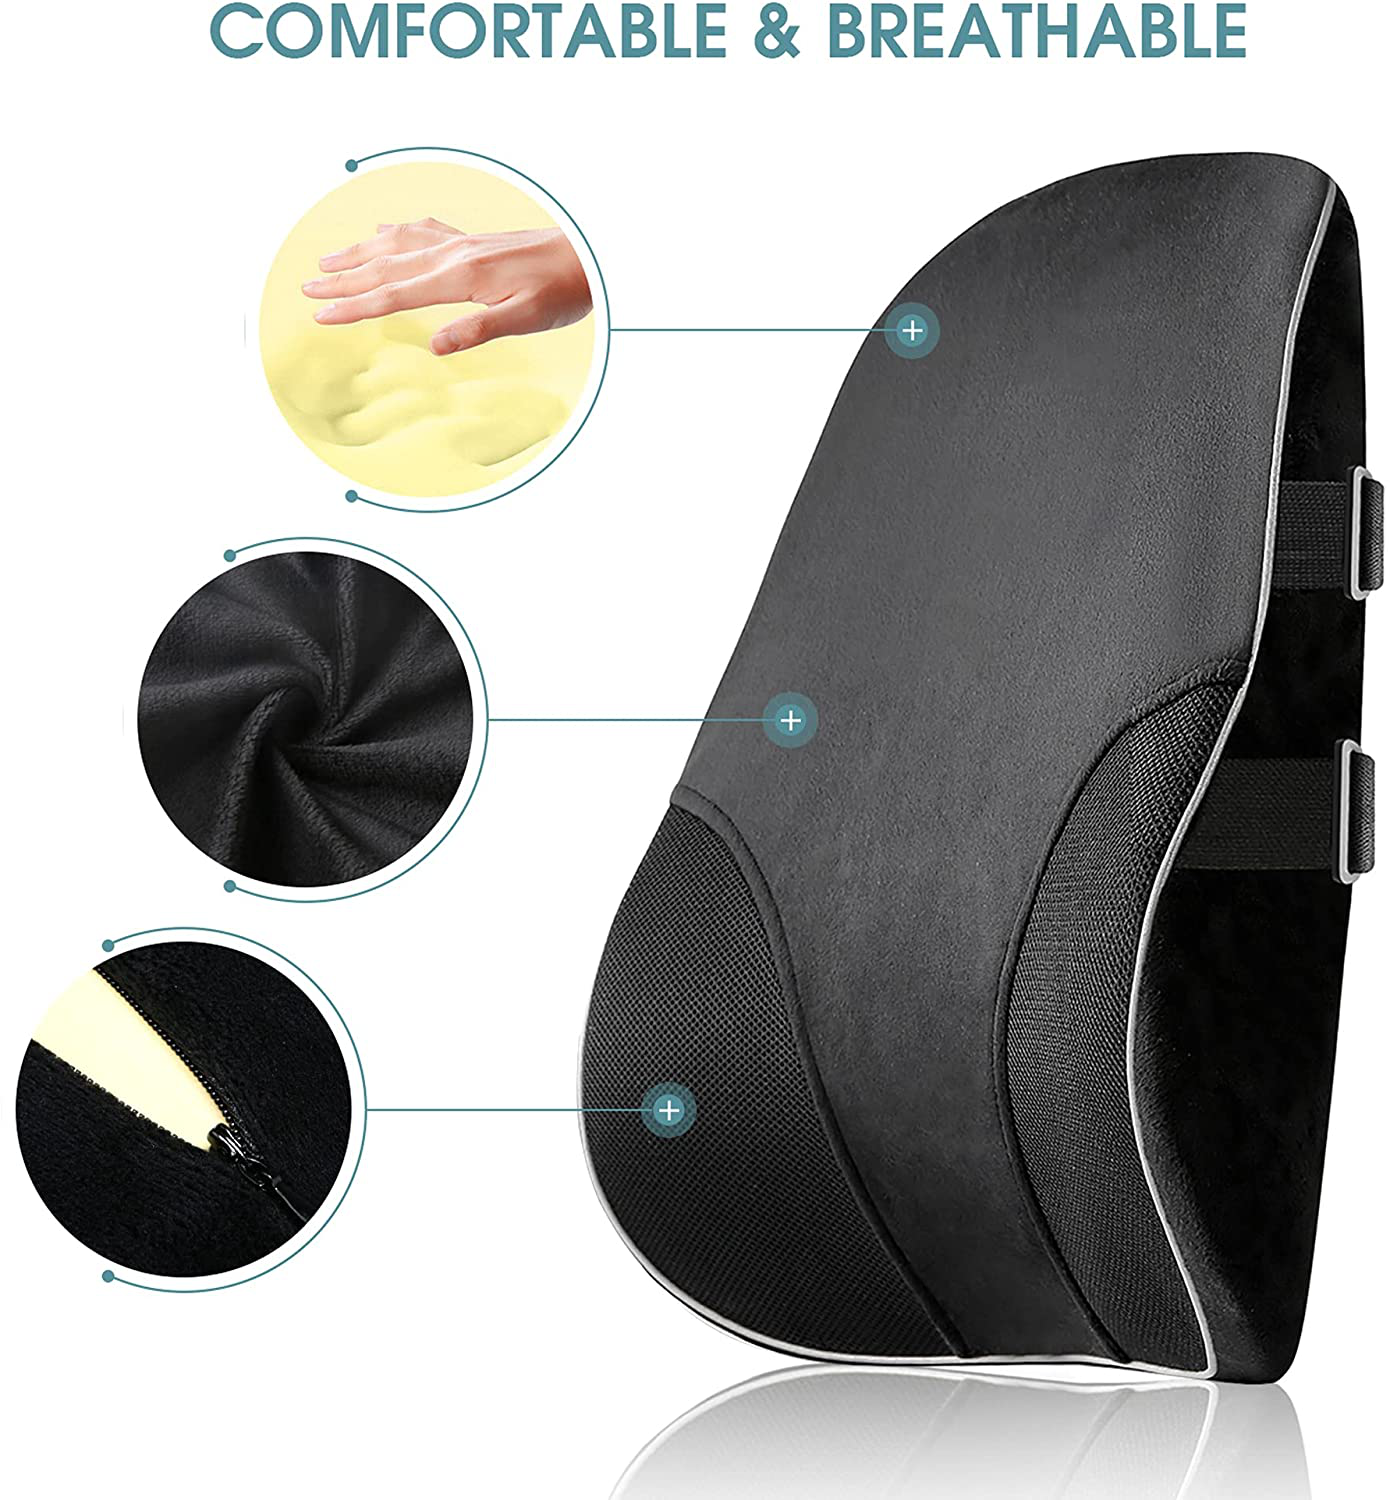 Lumbar Support Pillow，Memory Foam Back Support Pillows with Breathable Mesh Cover,Office Chair Cushion That Relieves Back and Cervical Pain，Suitable for Office Chair,Car Seat,Gaming Chair，Wheelchair